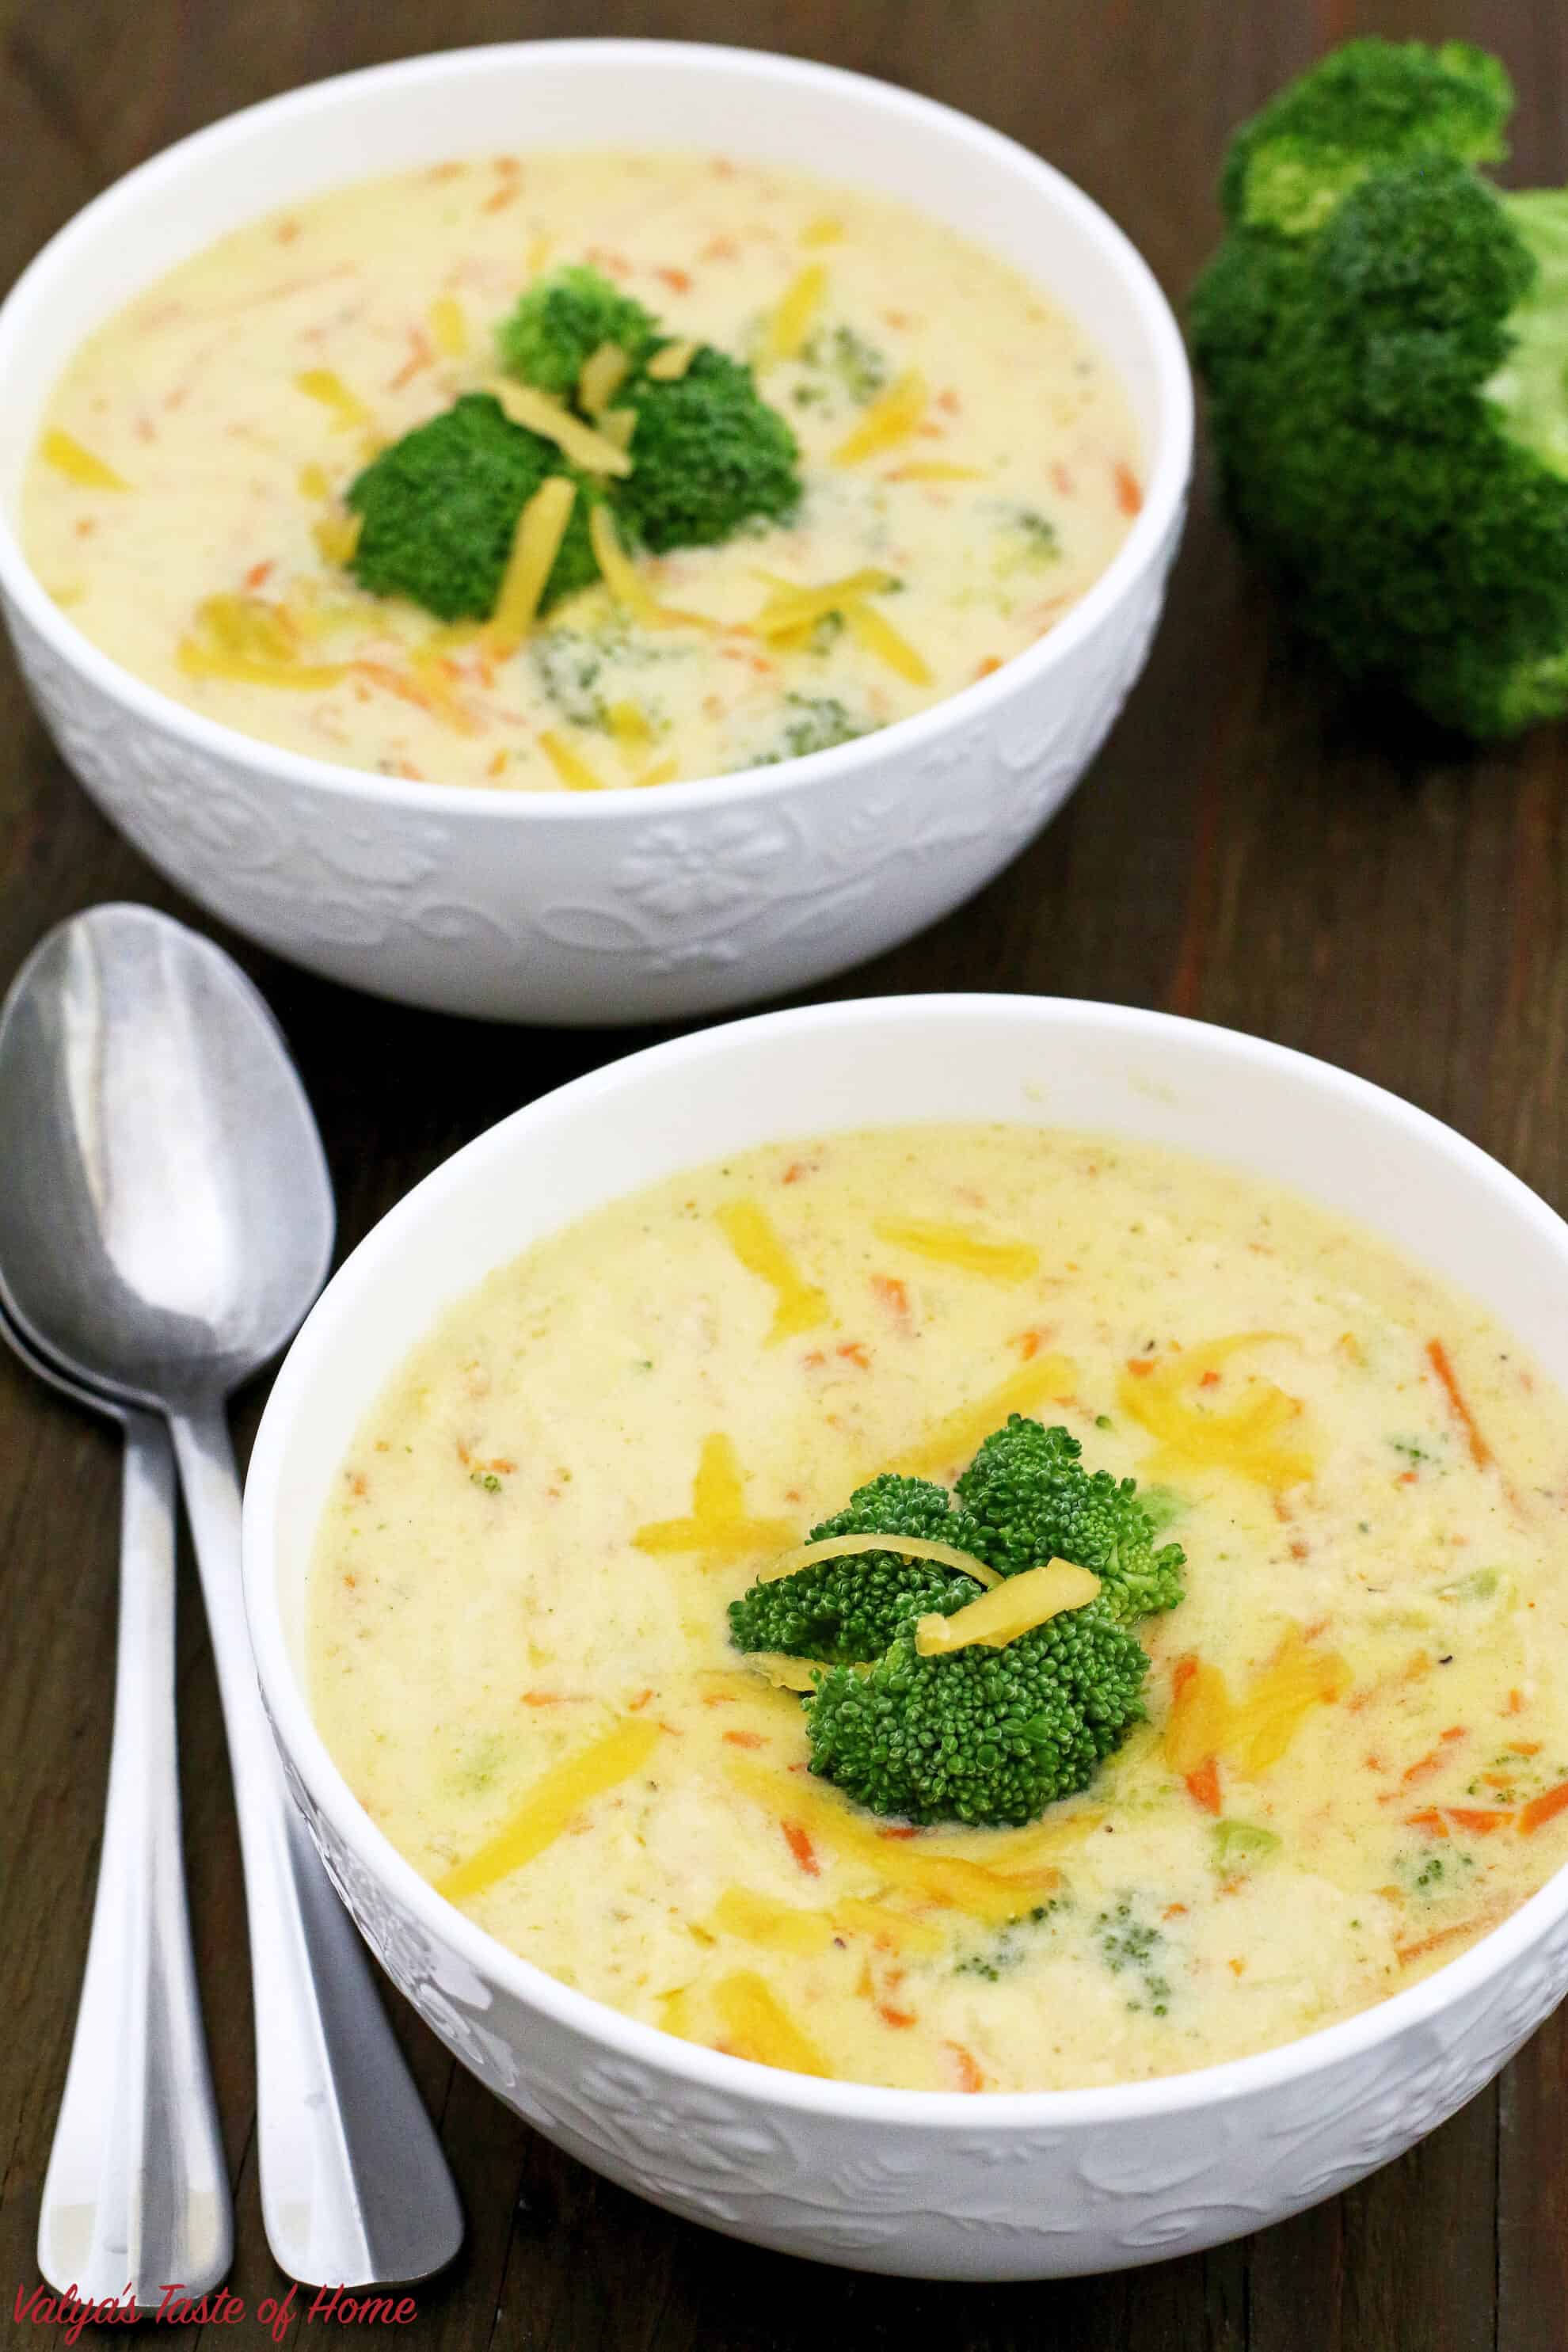 What is there not to like about this creamy, full of flavor, loaded with vegetables, and easy to make a delicious bowl of Easy Broccoli and Cheddar Soup (Video Recipe). Literally, this soup can be made under 30 minutes!